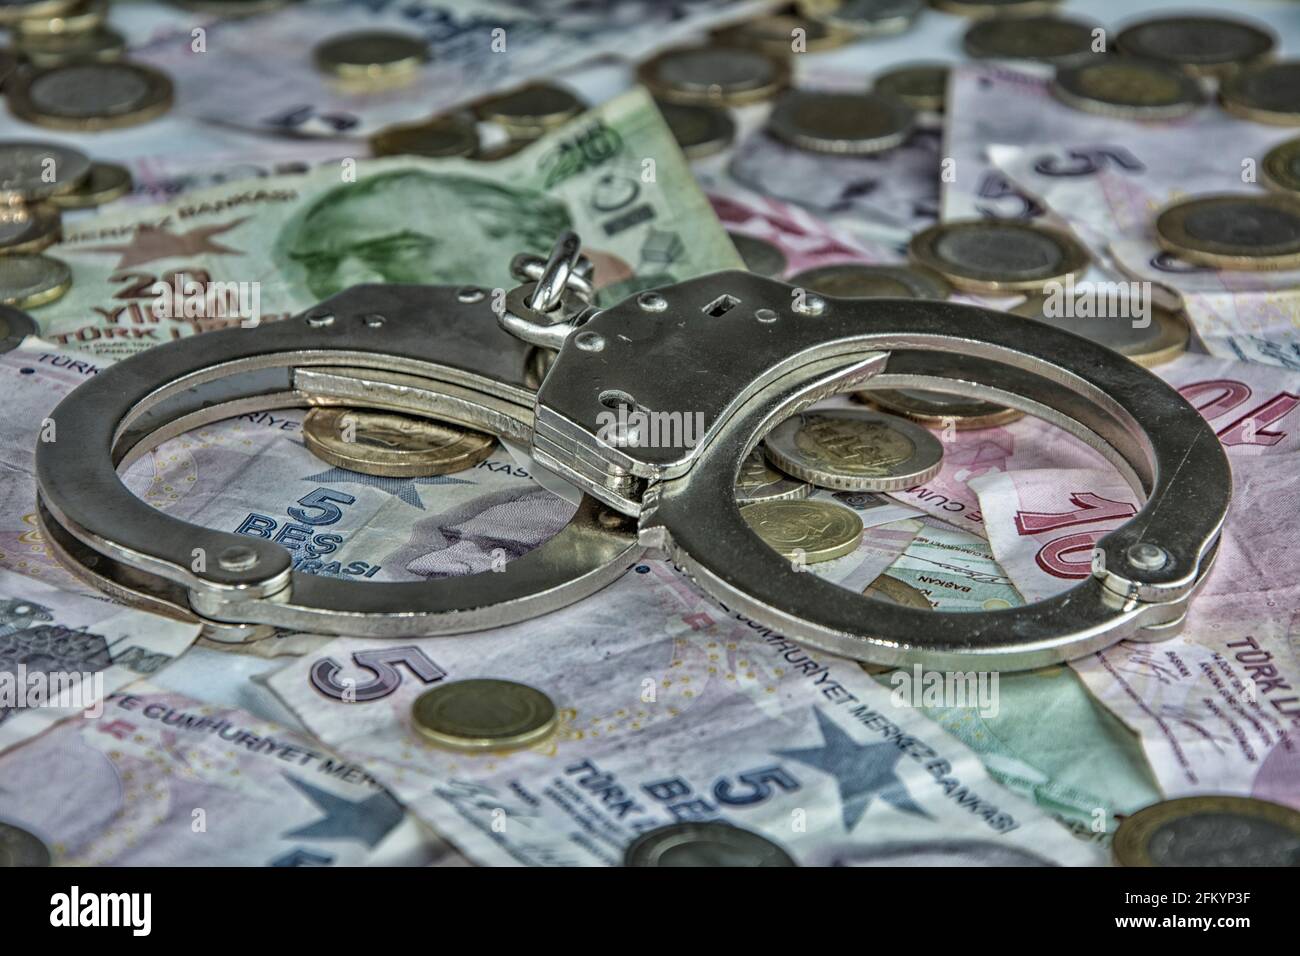 Handcuffs on the paper money in close-up on the screen covered with paper money Stock Photo